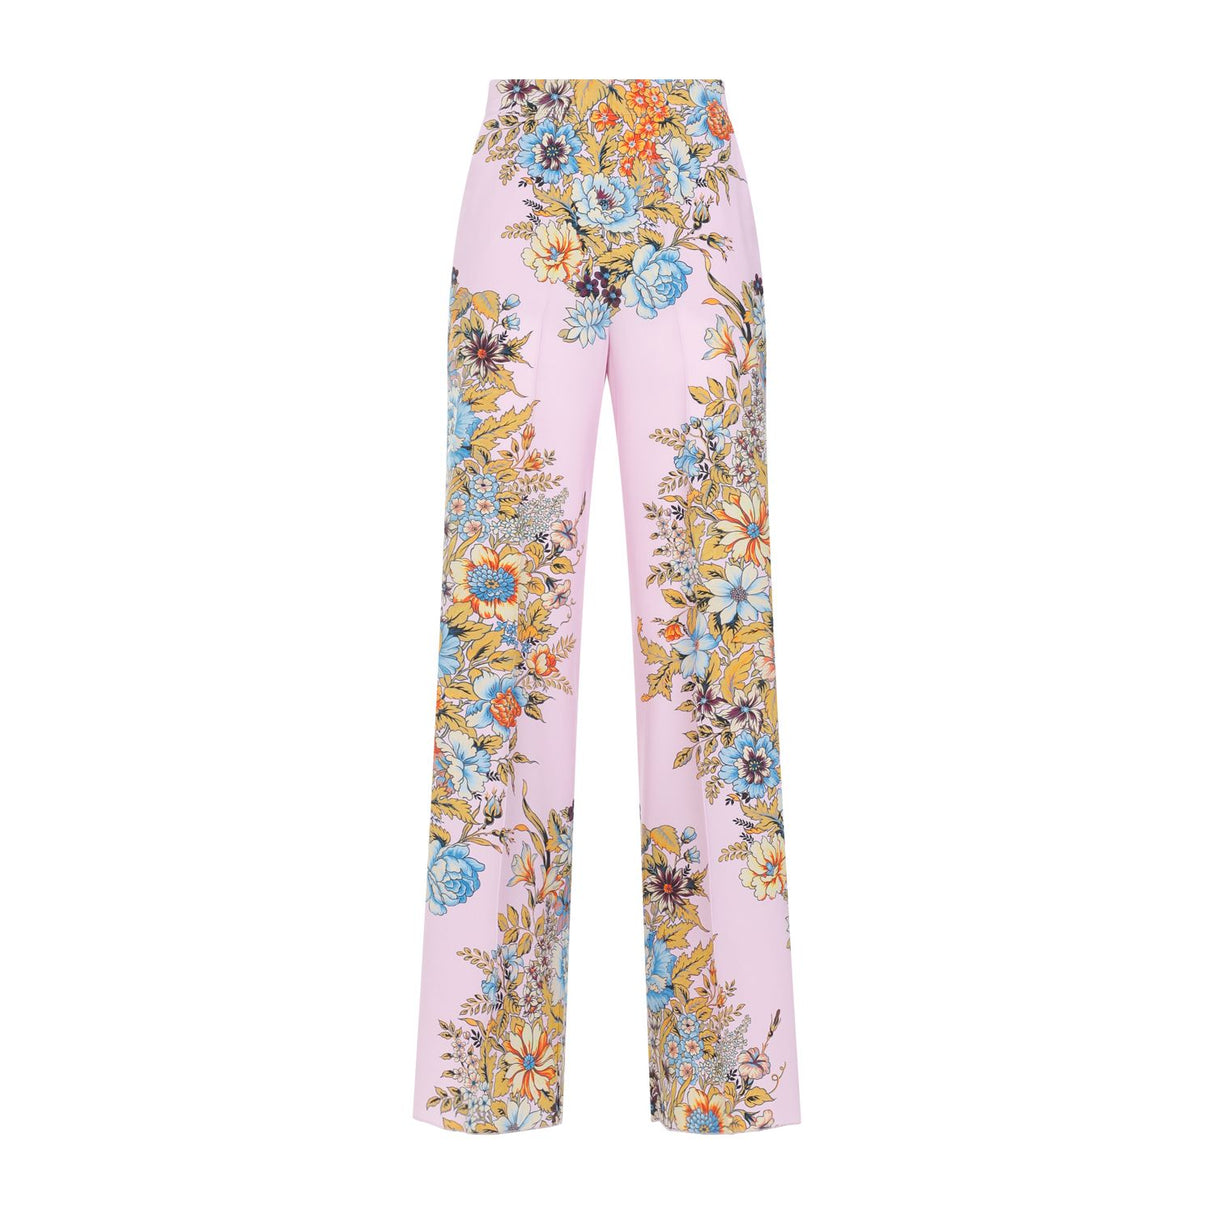 ETRO Luxurious Silk Pants in Pretty Pink and Purple for Women